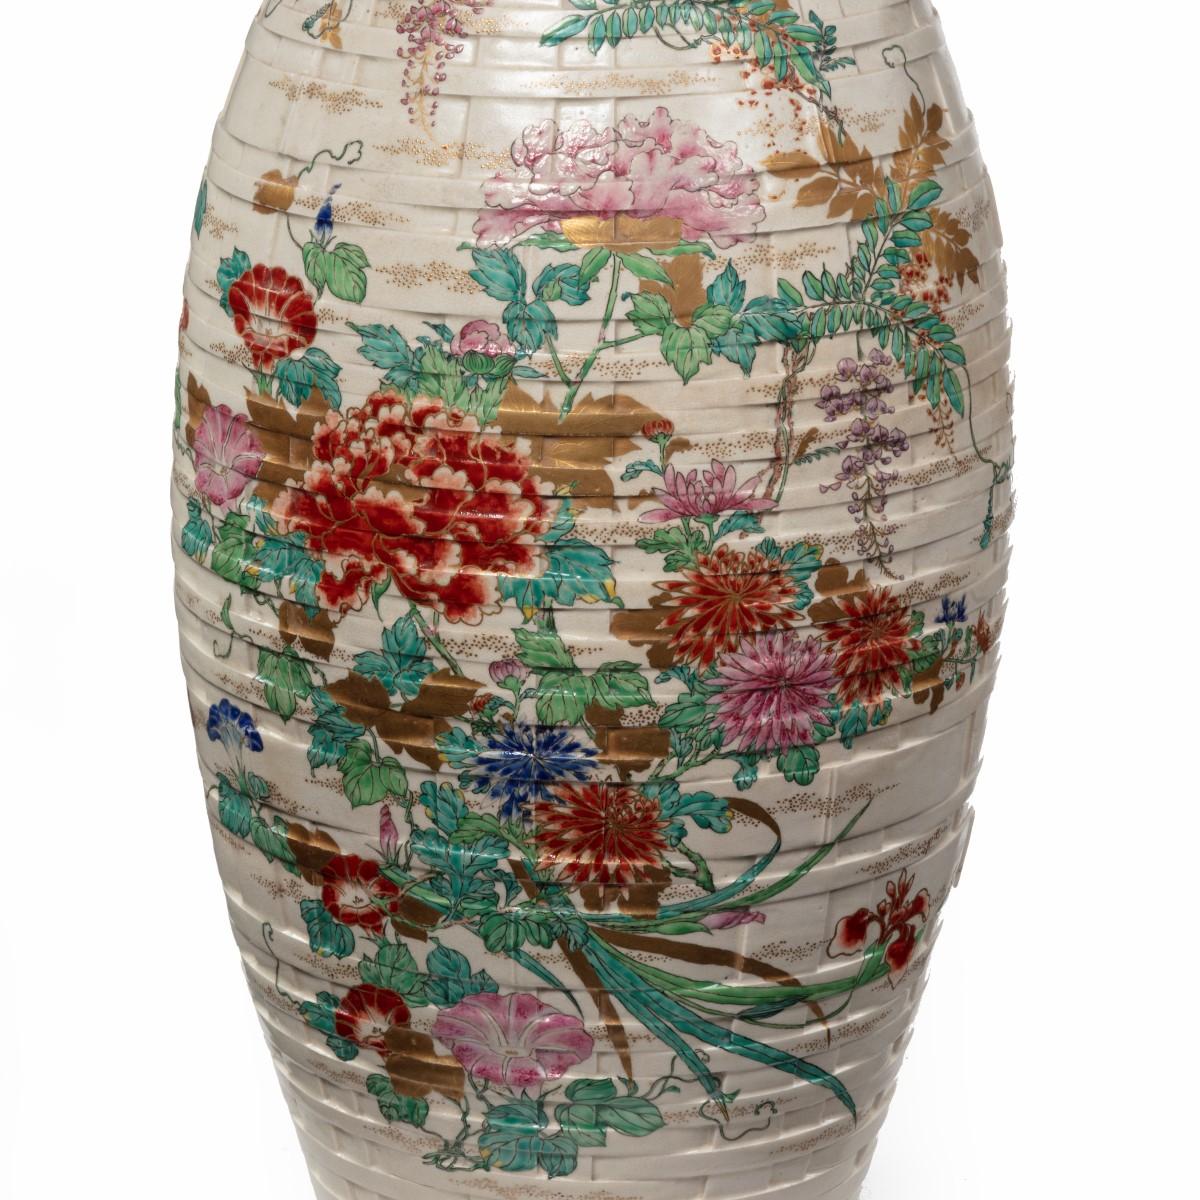 A large Meiji period Satsuma earthenware floor vase, the of baluster form, painted in pastel overglaze enamels and gilding with two large sprays of flowers including prunus blossom, carnations, tiger-lilies, wistaria, peonies and petunias, the neck